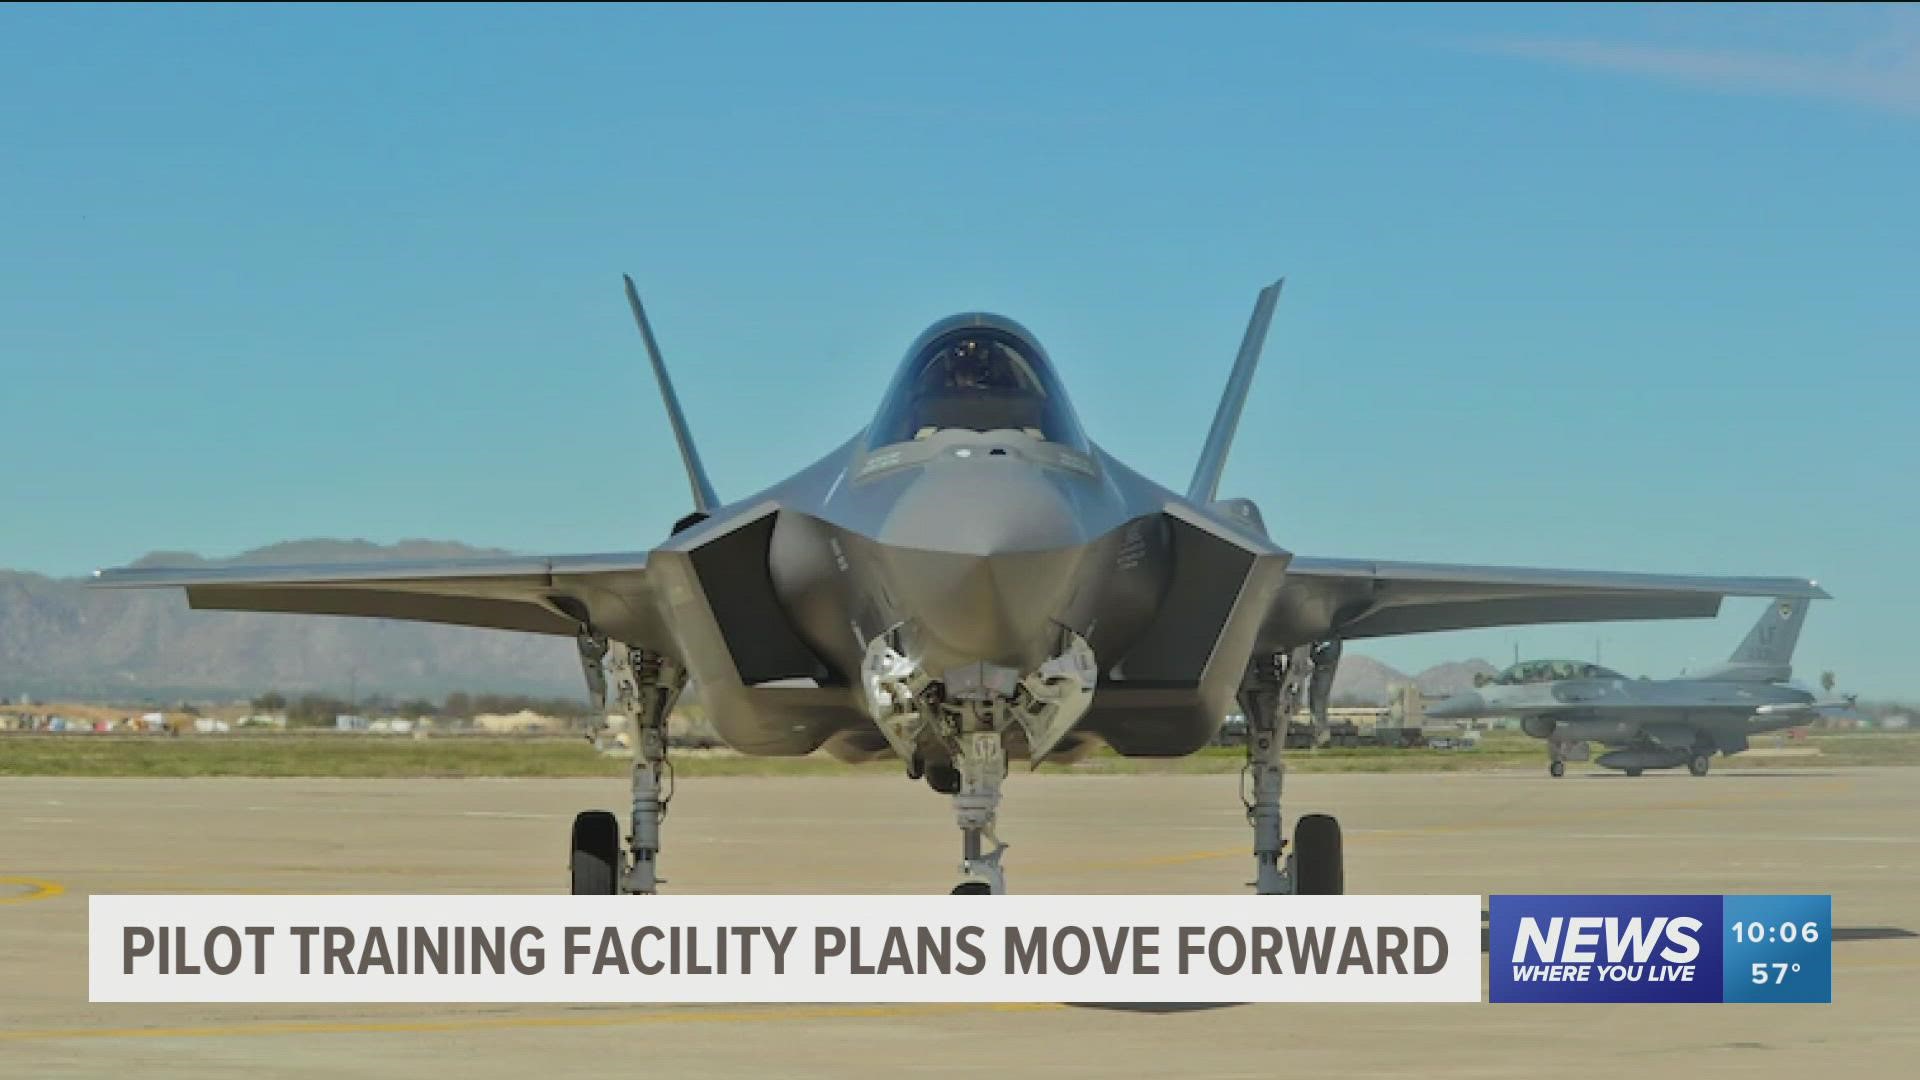 The airbase will be the future home of F-35 fighter planes and a Republic of Singapore F-16 squadron.